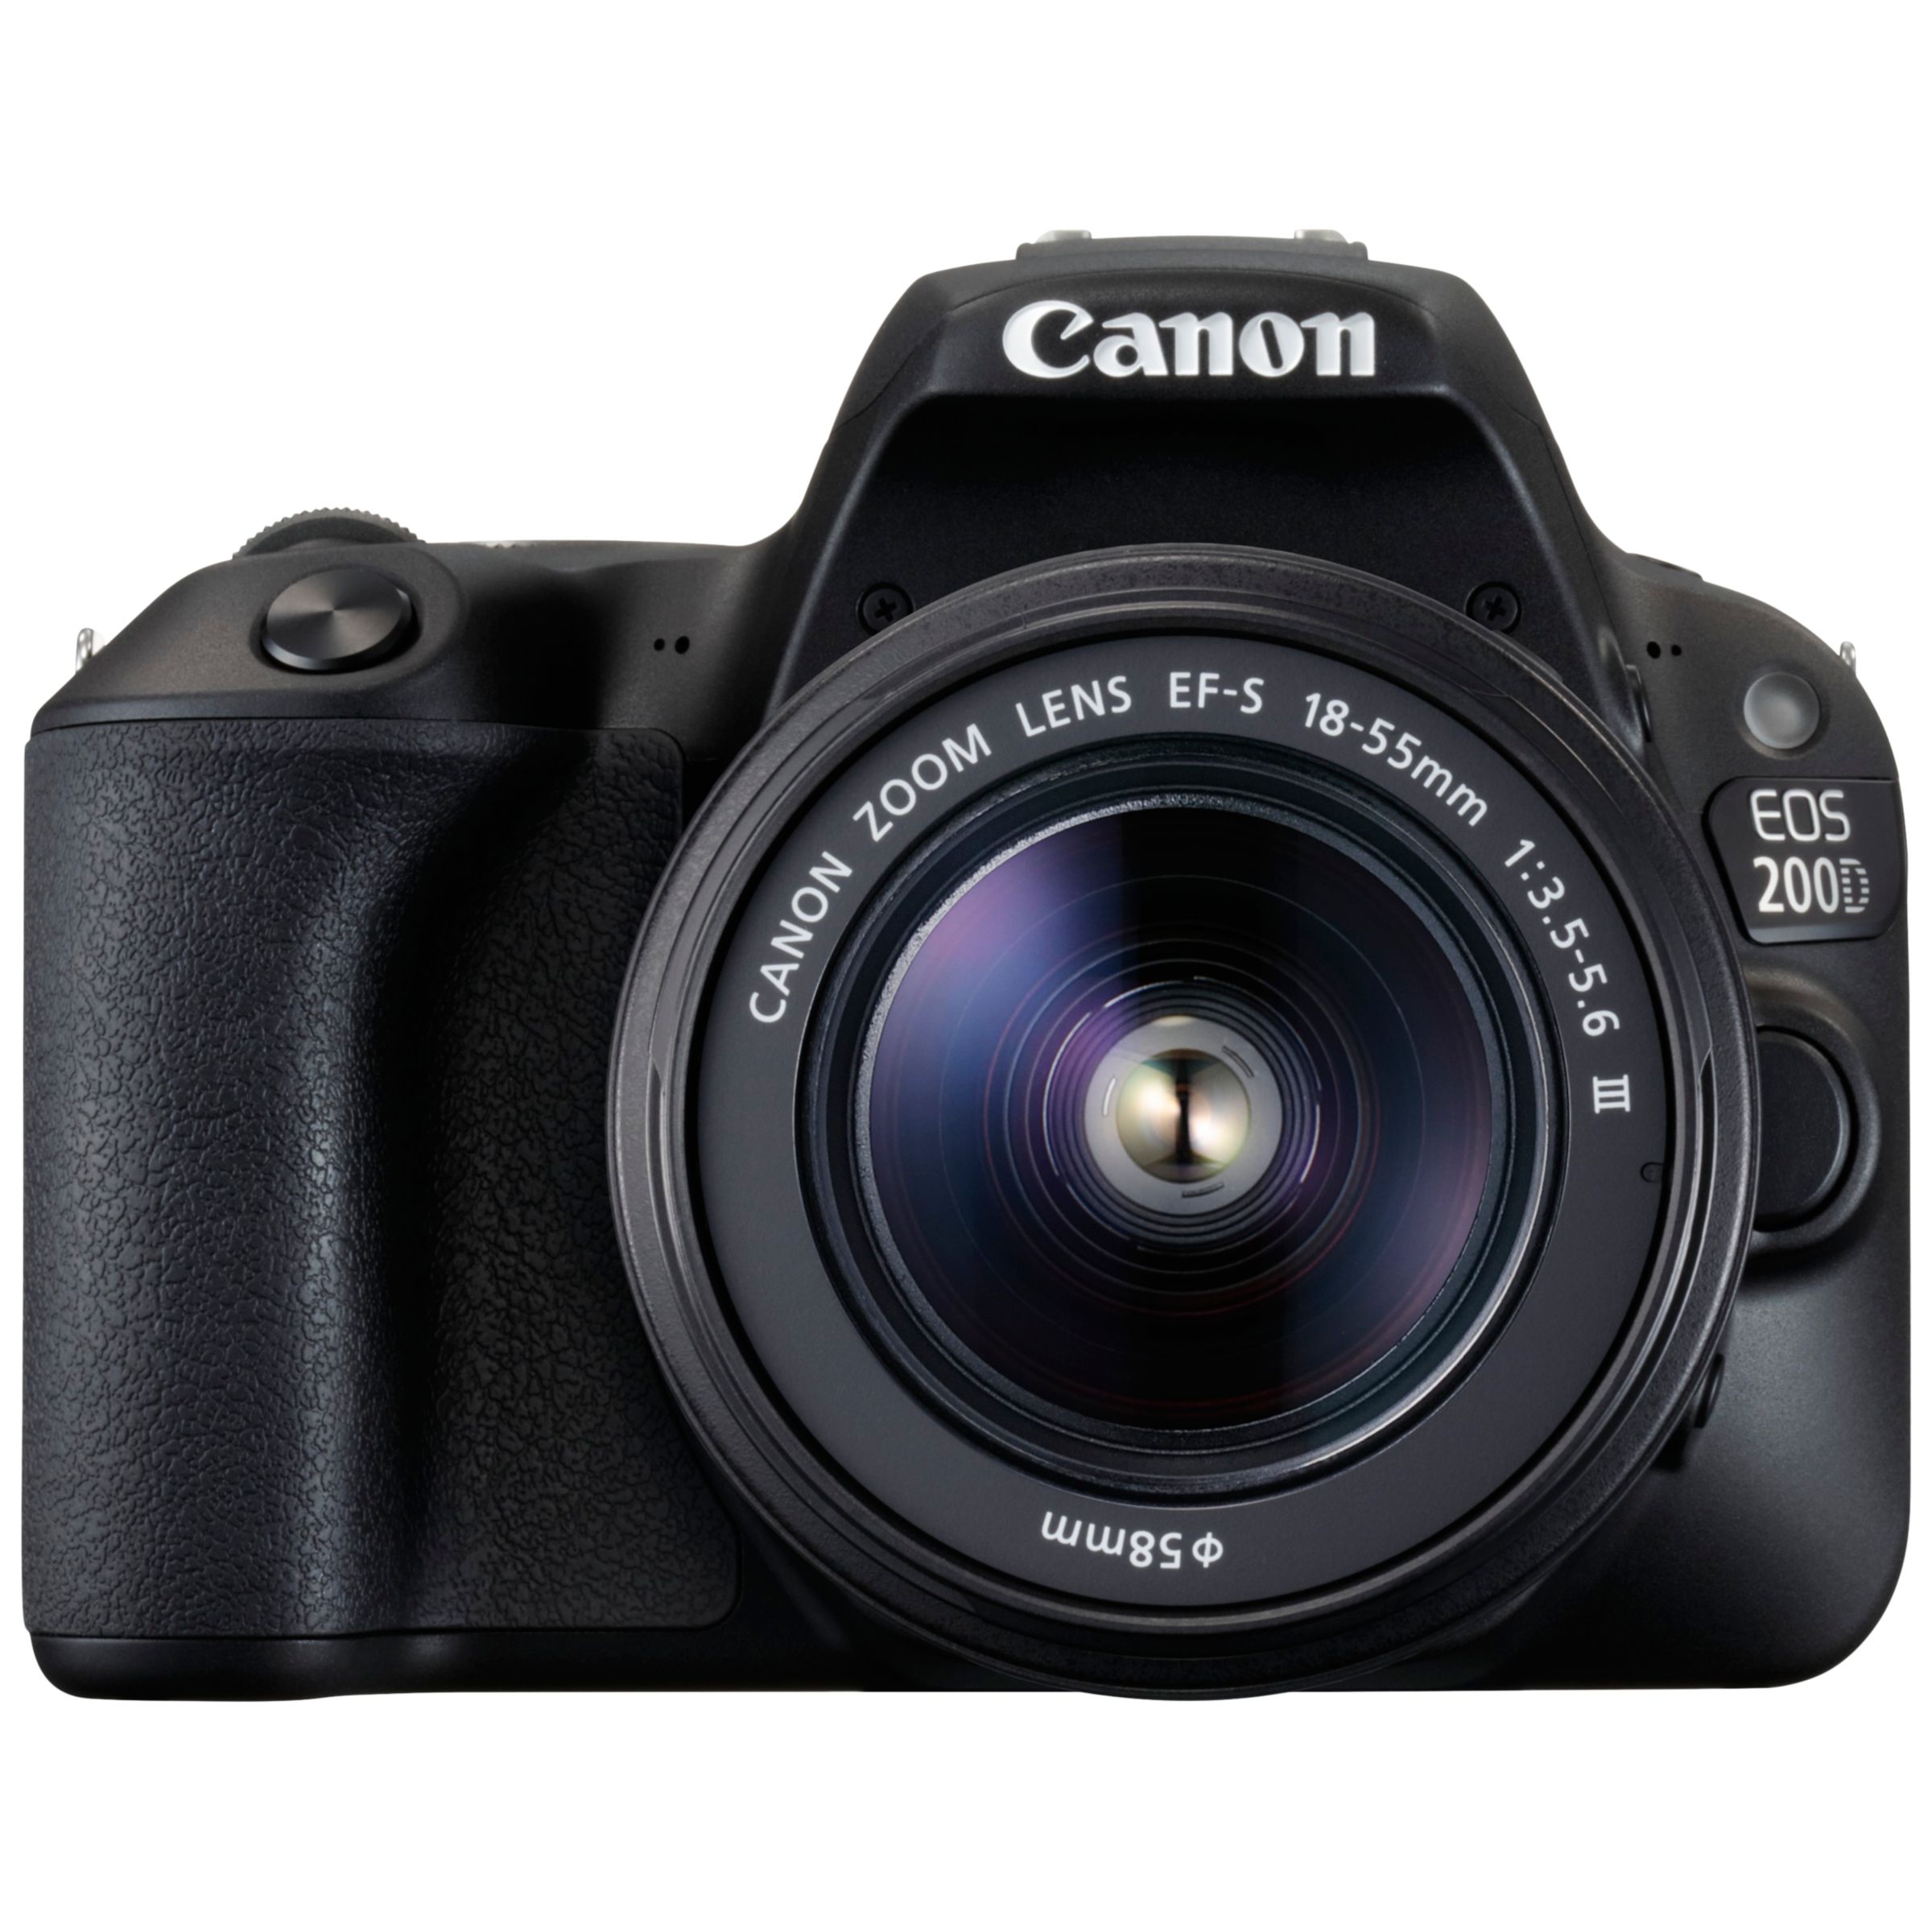 Canon EOS 200D Digital SLR Camera with 18-55mm f/3.5-5.6 III Lens, 1080p Full HD, 24.2MP, Wi-Fi, Bluetooth, NFC, Optical Viewfinder, 3 Vari-angle Touch Screen, Black